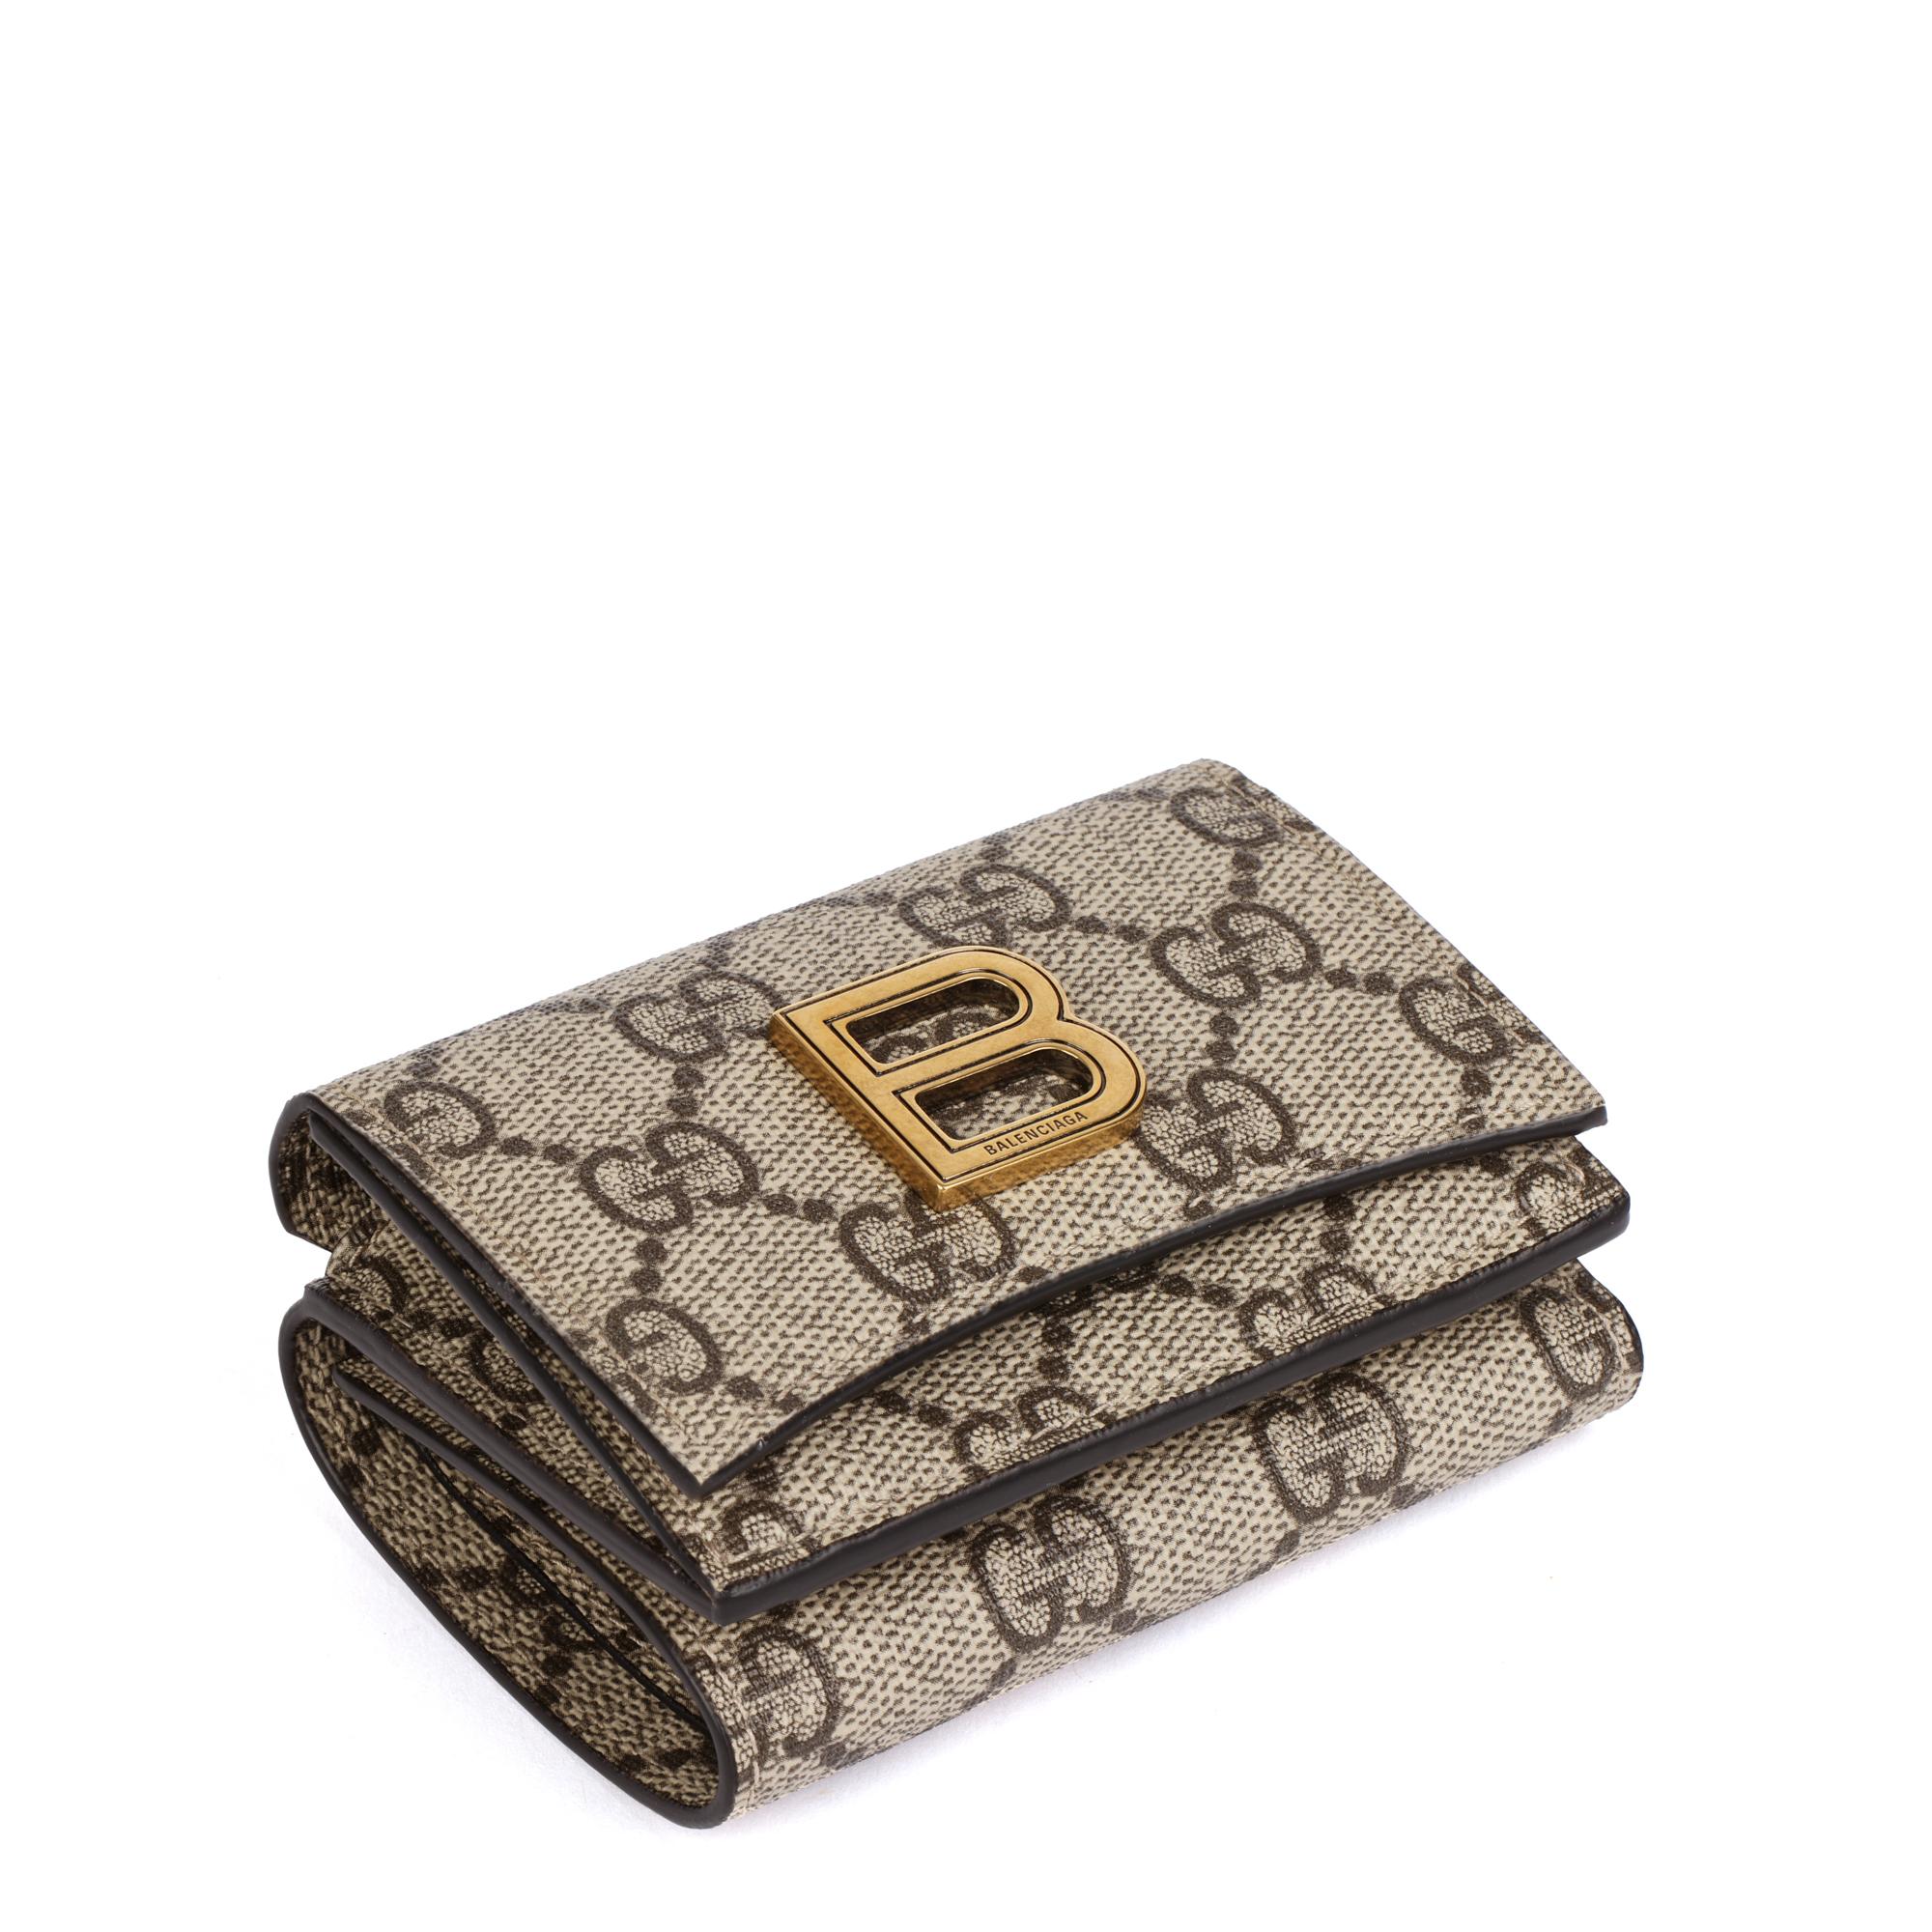 Gucci x Balenciaga GG Supreme Canvas The Hacker Project Hourglass Card Case Wallet

CONDITION NOTES
The exterior is excellent condition with light signs of use.
The interior is in excellent condition with light signs of use.
The hardware is in